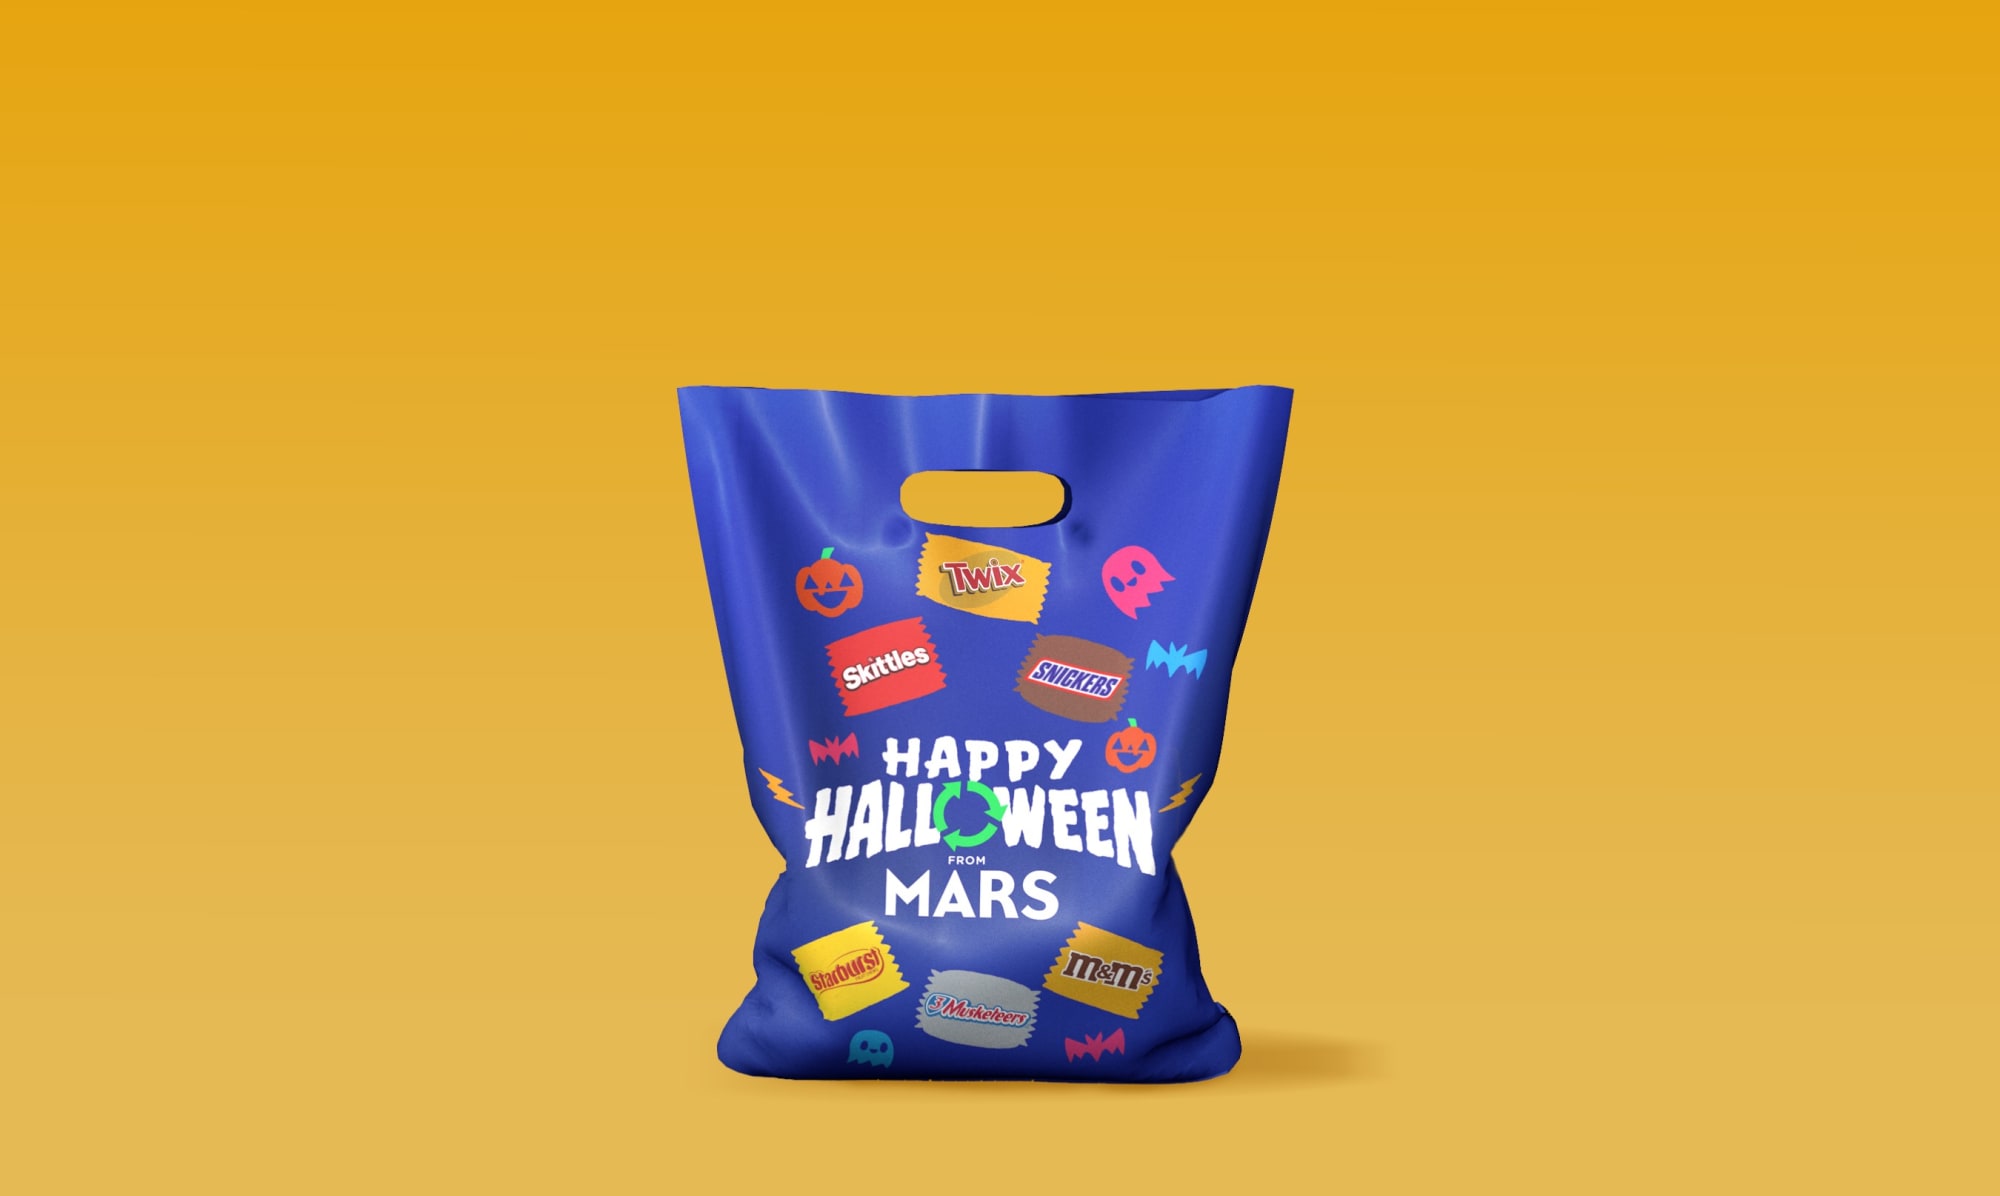 Mars transforms Halloween candy traditions with Trick or Trash bags